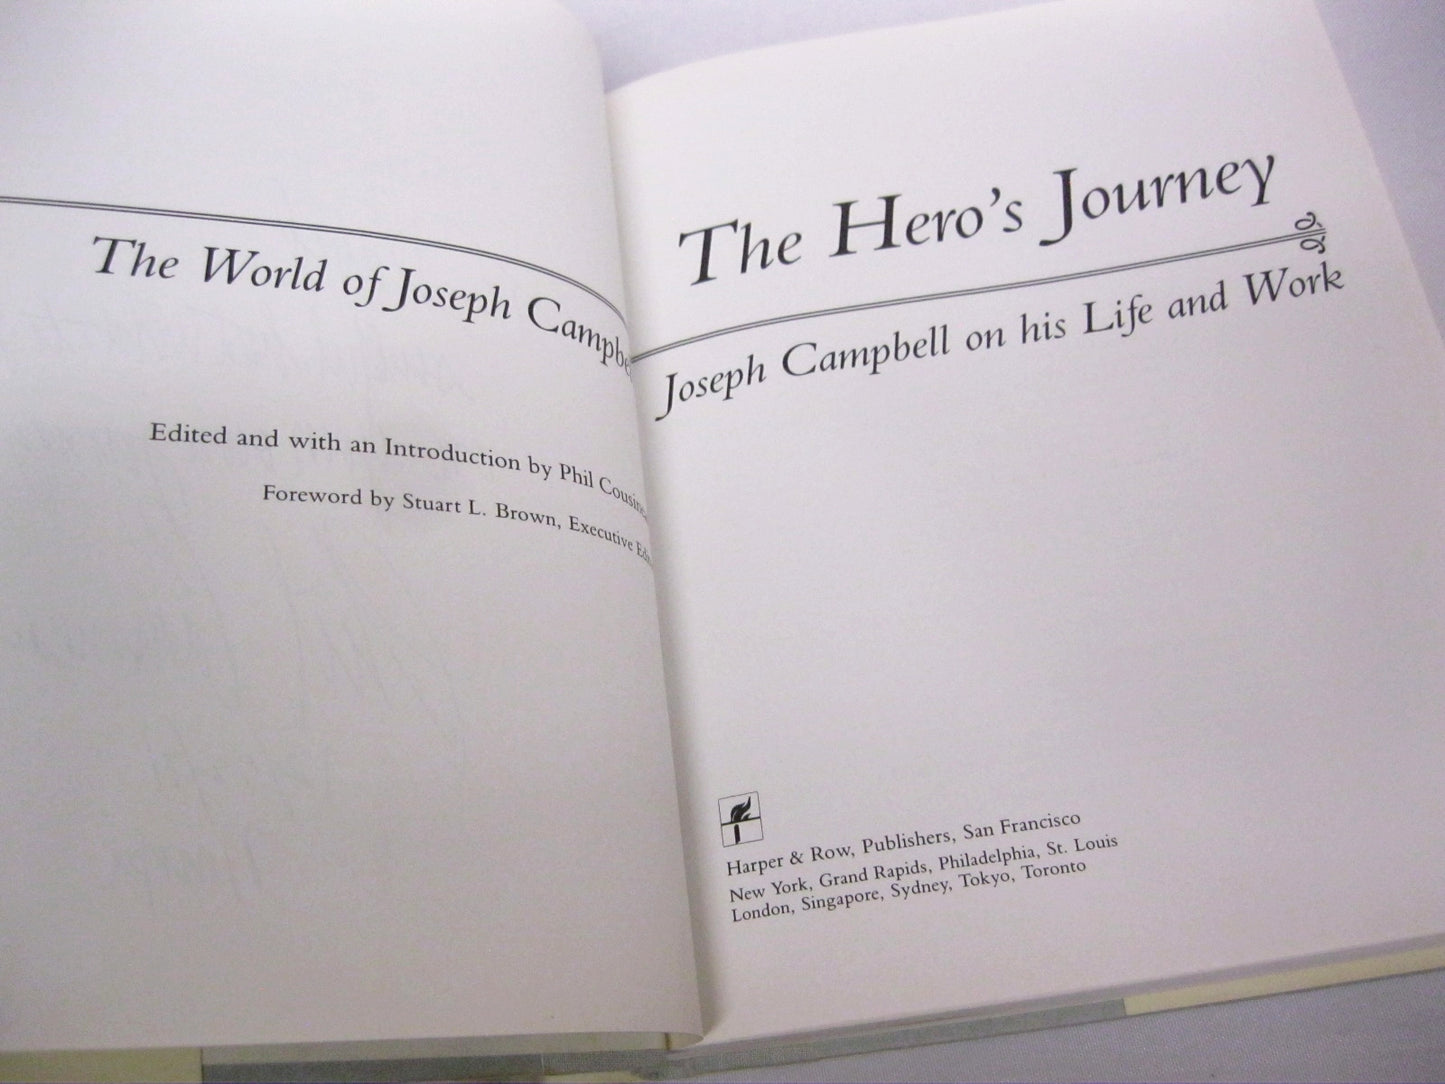 The Hero's Journey: Joseph Campbell On His Life & Works by Phil Cousineau